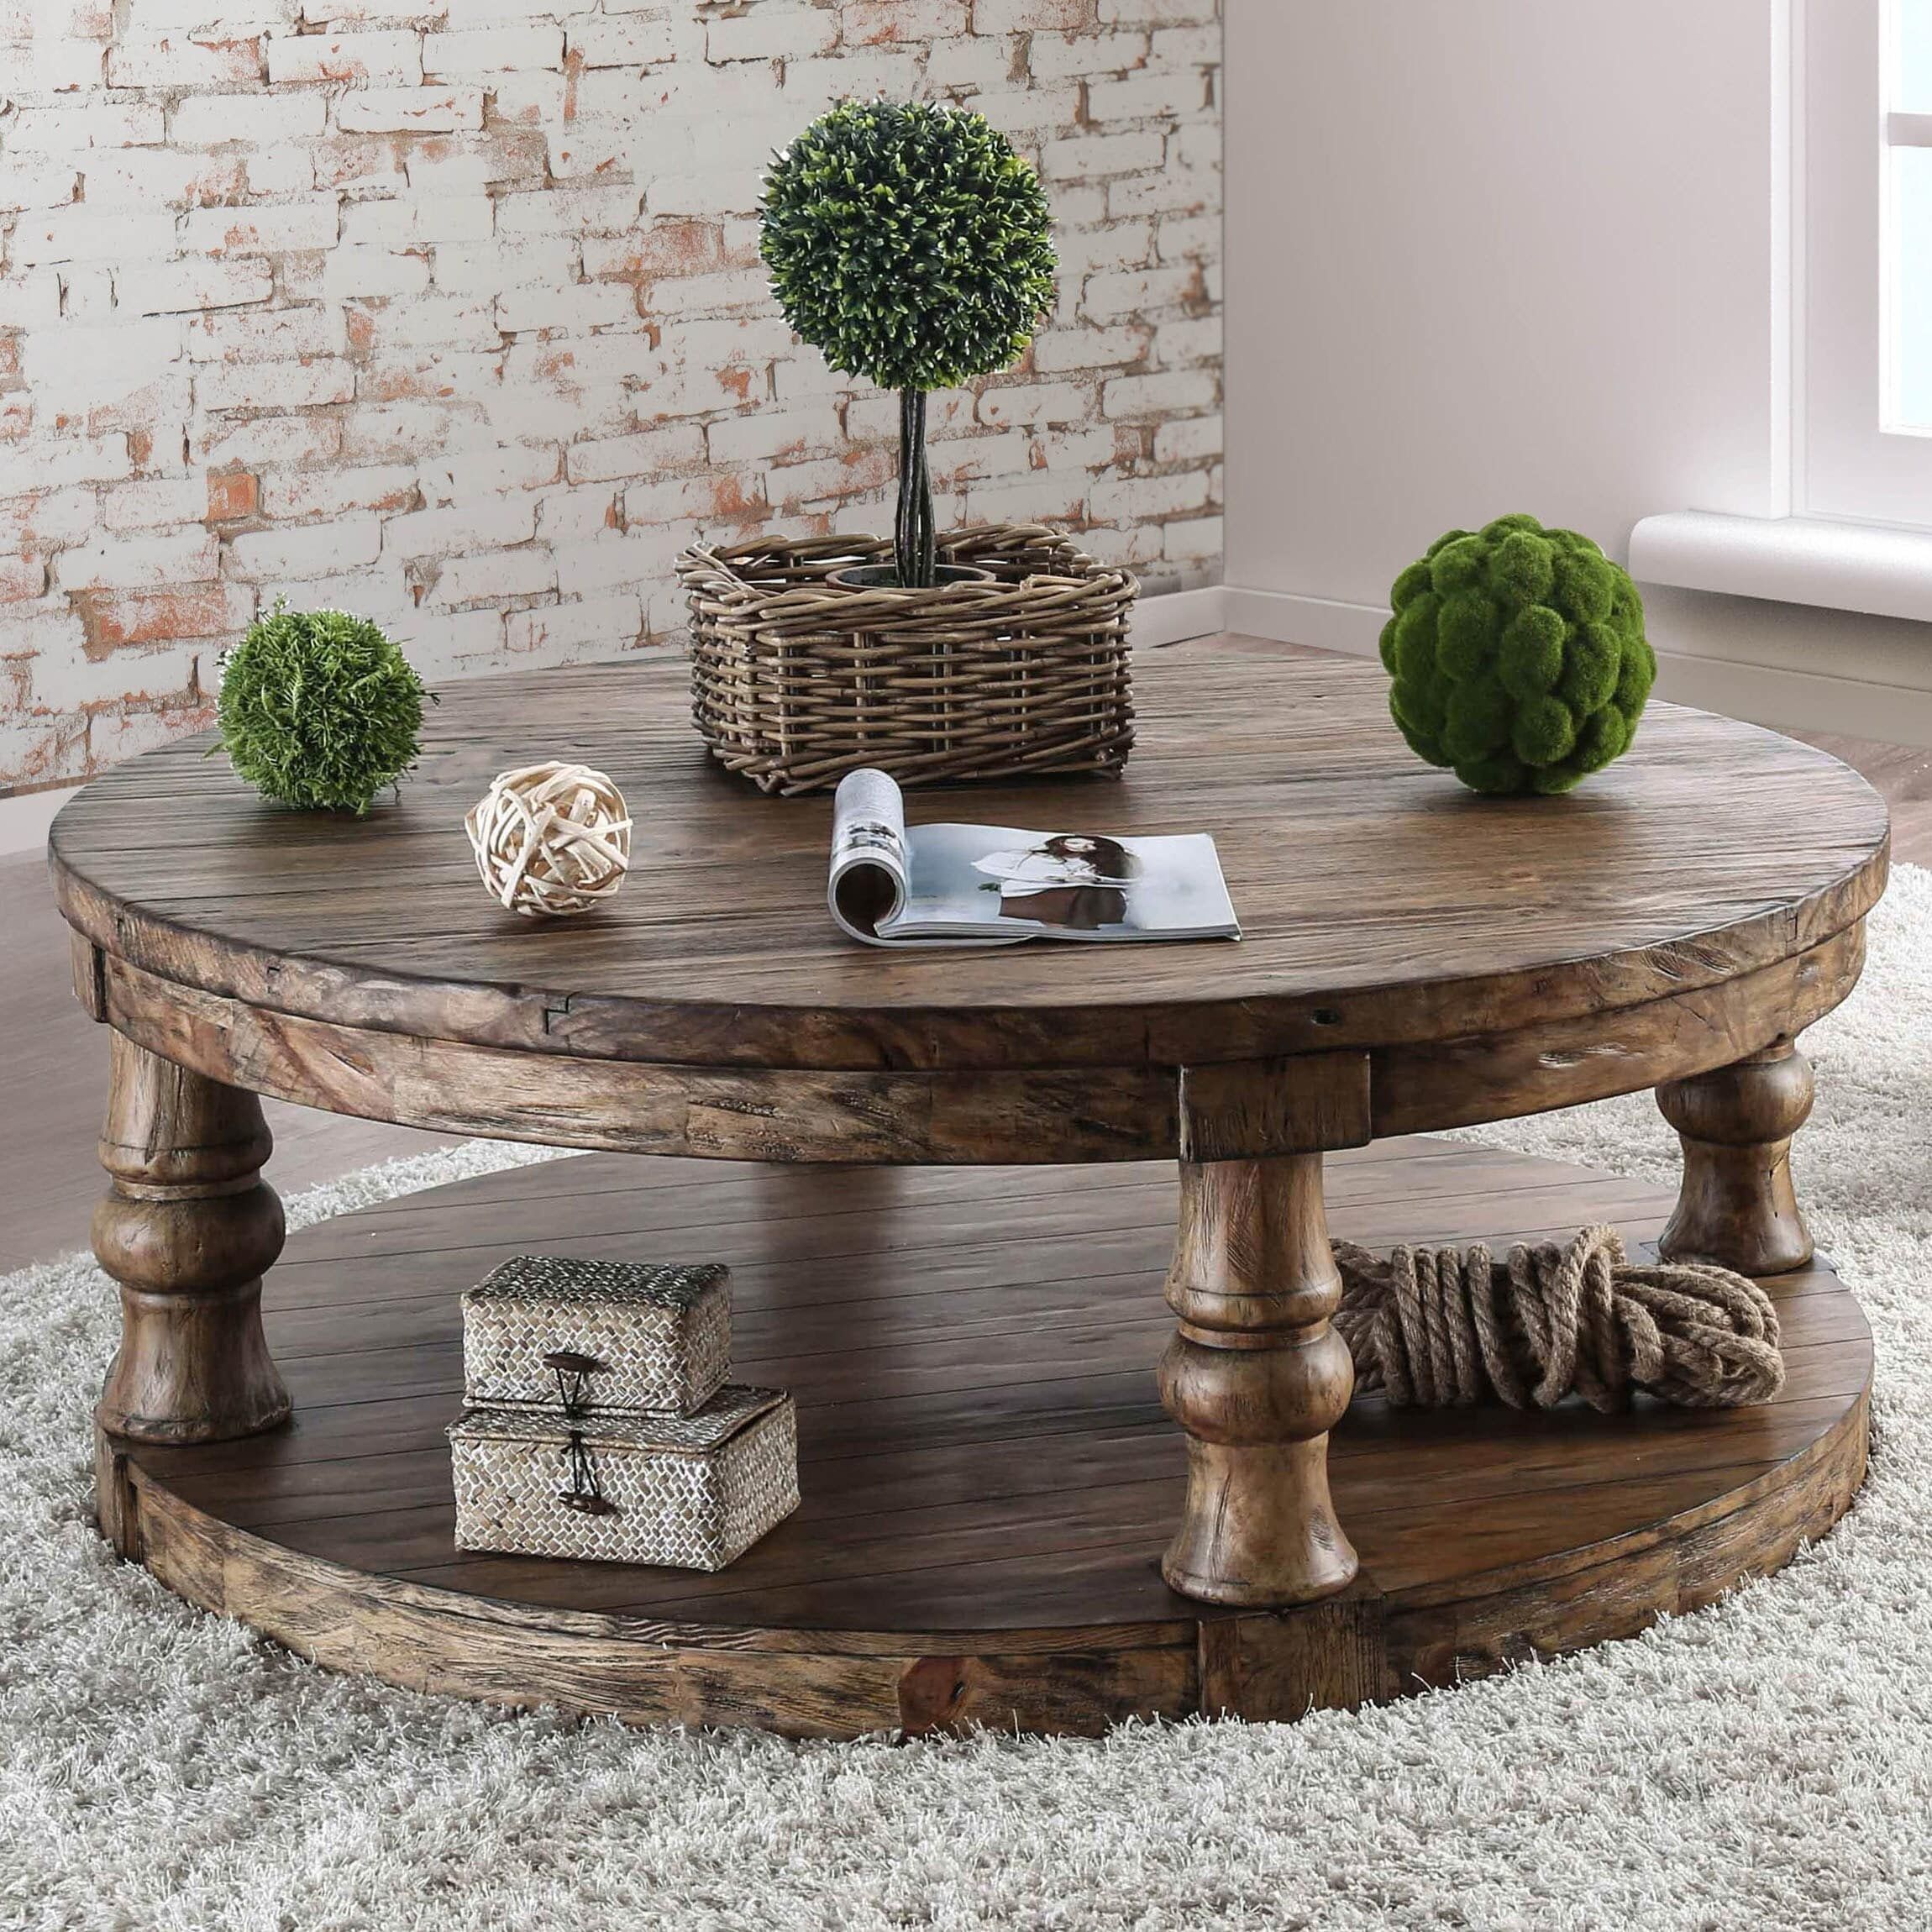 Round Rustic Coffee Table Sets – Rustic Coffee Tables That You Need To With Regard To Rustic Coffee Tables (View 15 of 15)